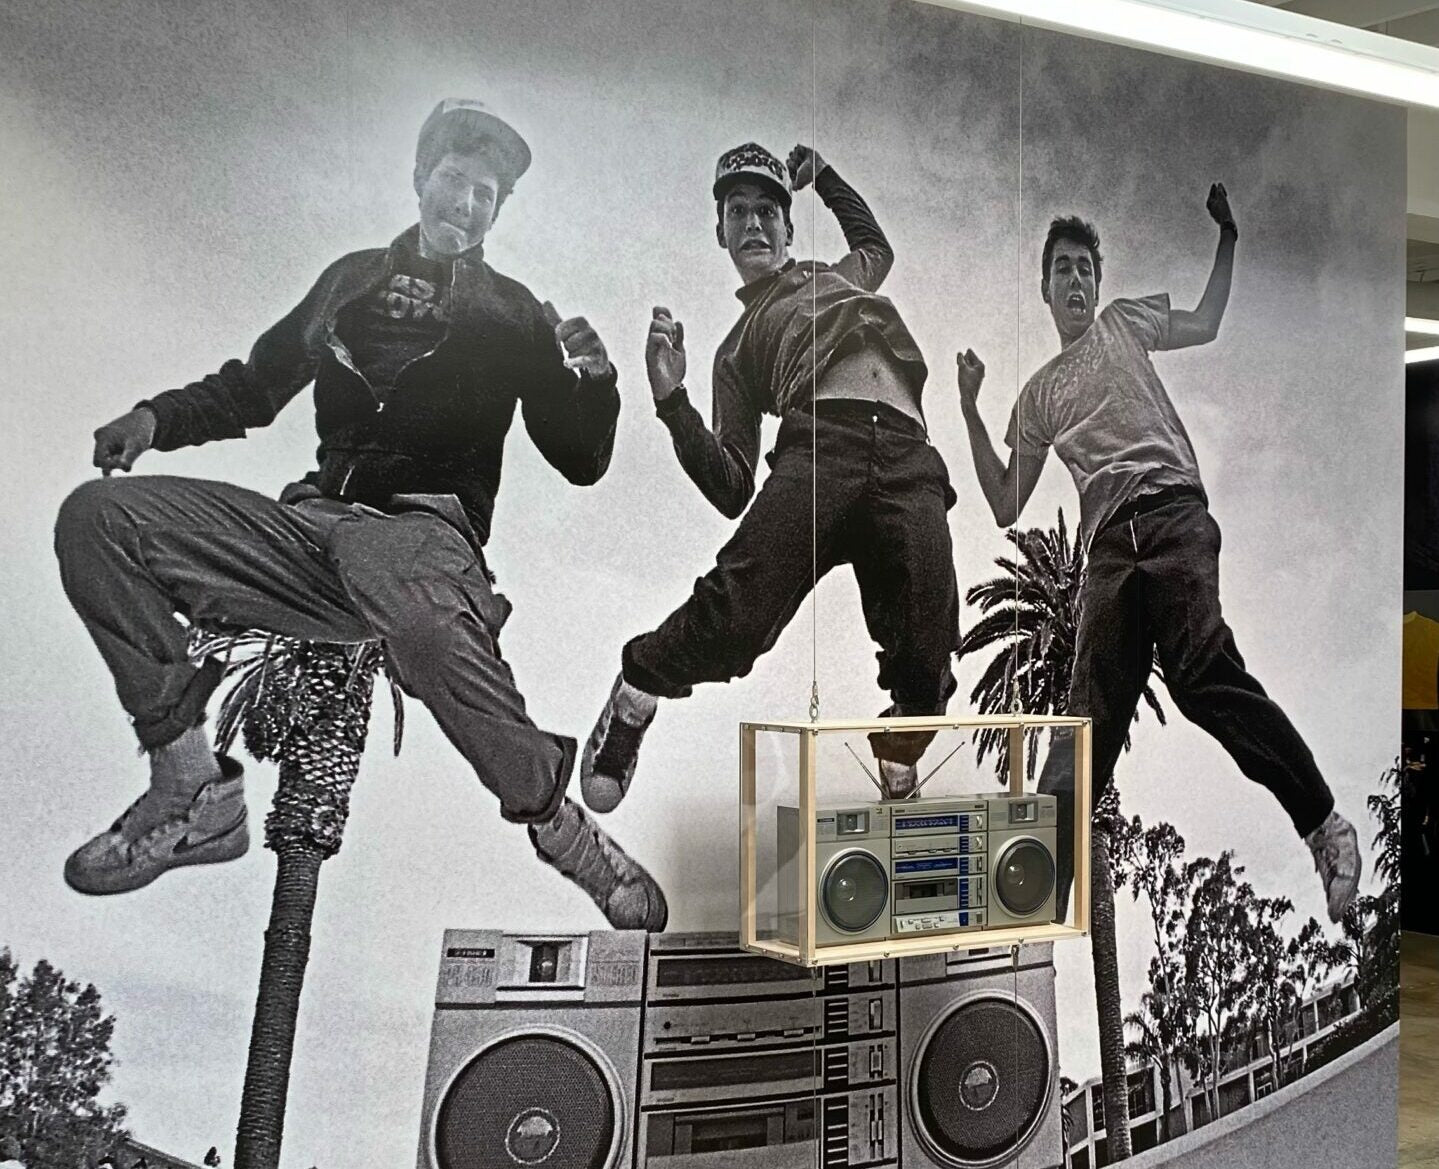 EXHIBIT frames forty years of Beastie Boys merging art and rebellion